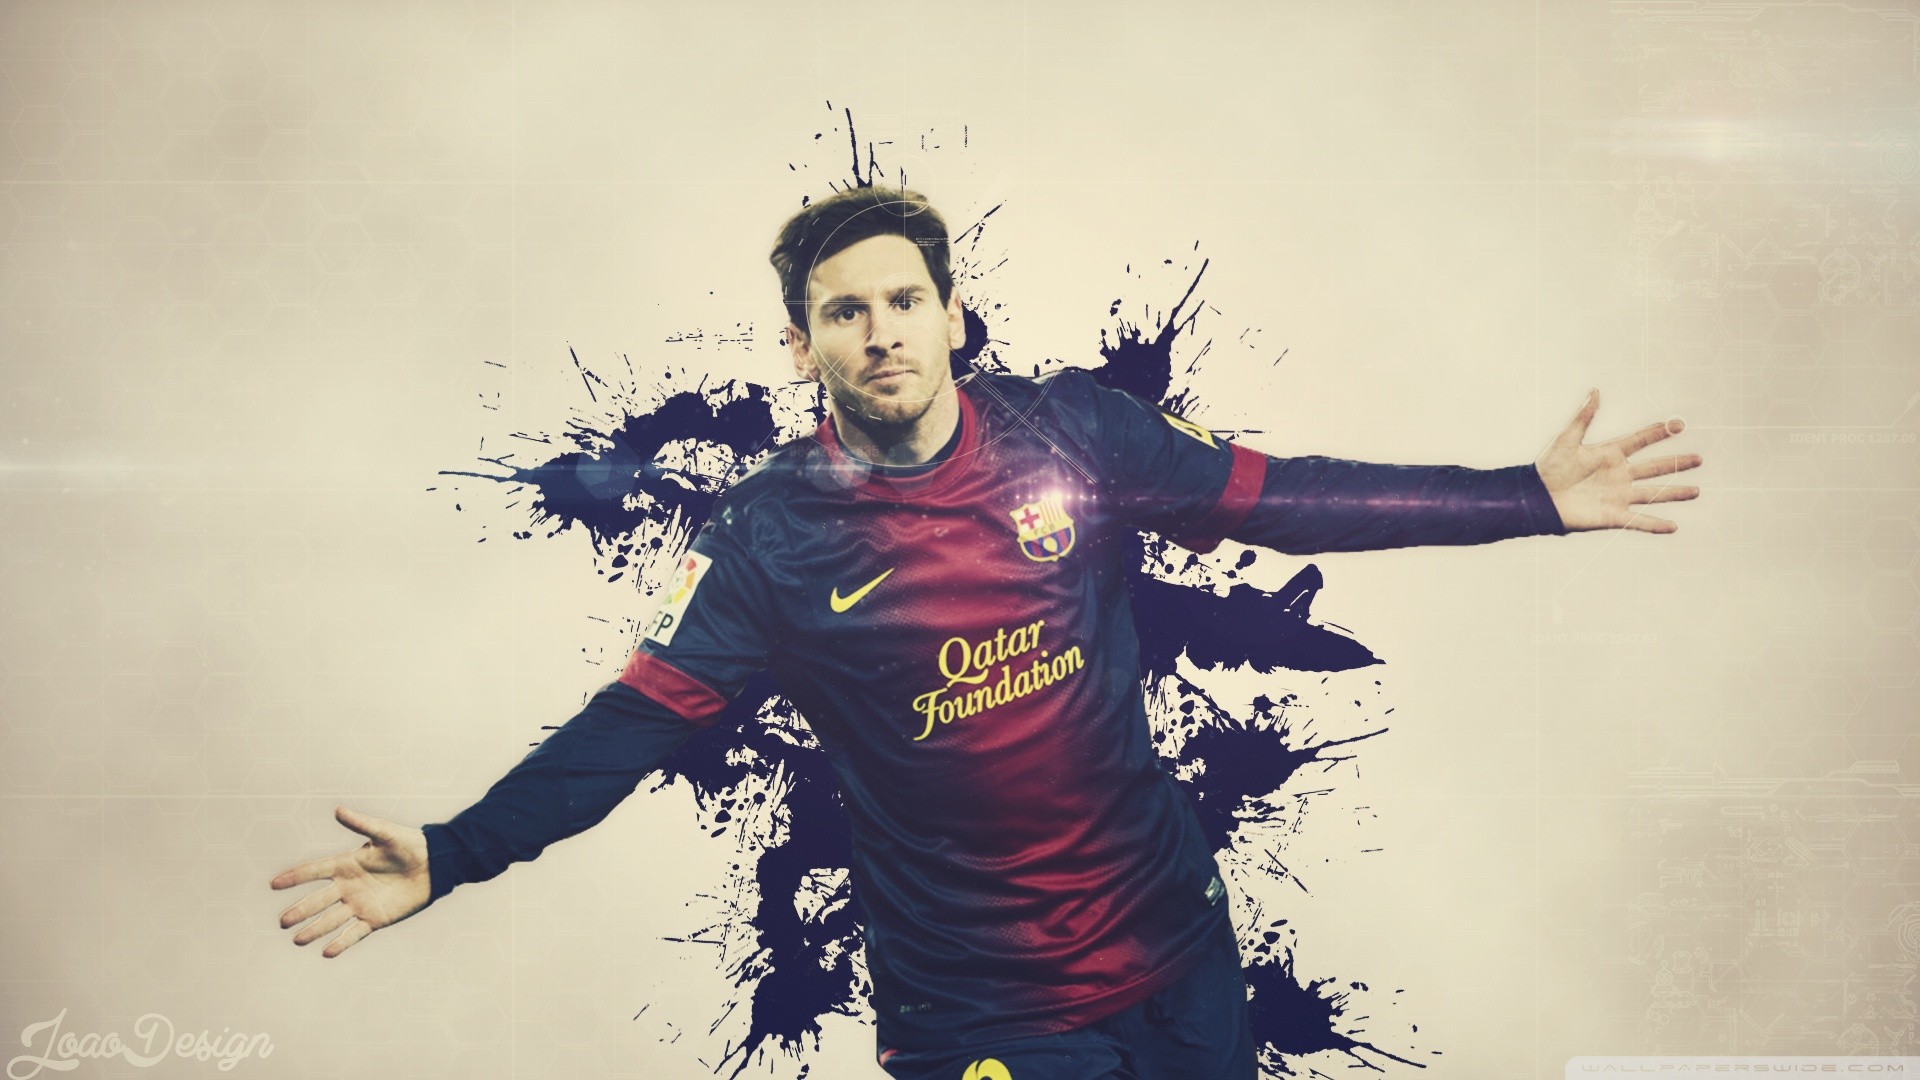 1920x1080 30 Cool Lionel Messi HD Wallpapers 2015 - Meshlo | All is well <3 |  Pinterest | Messi, Hd wallpaper and Wallpaper